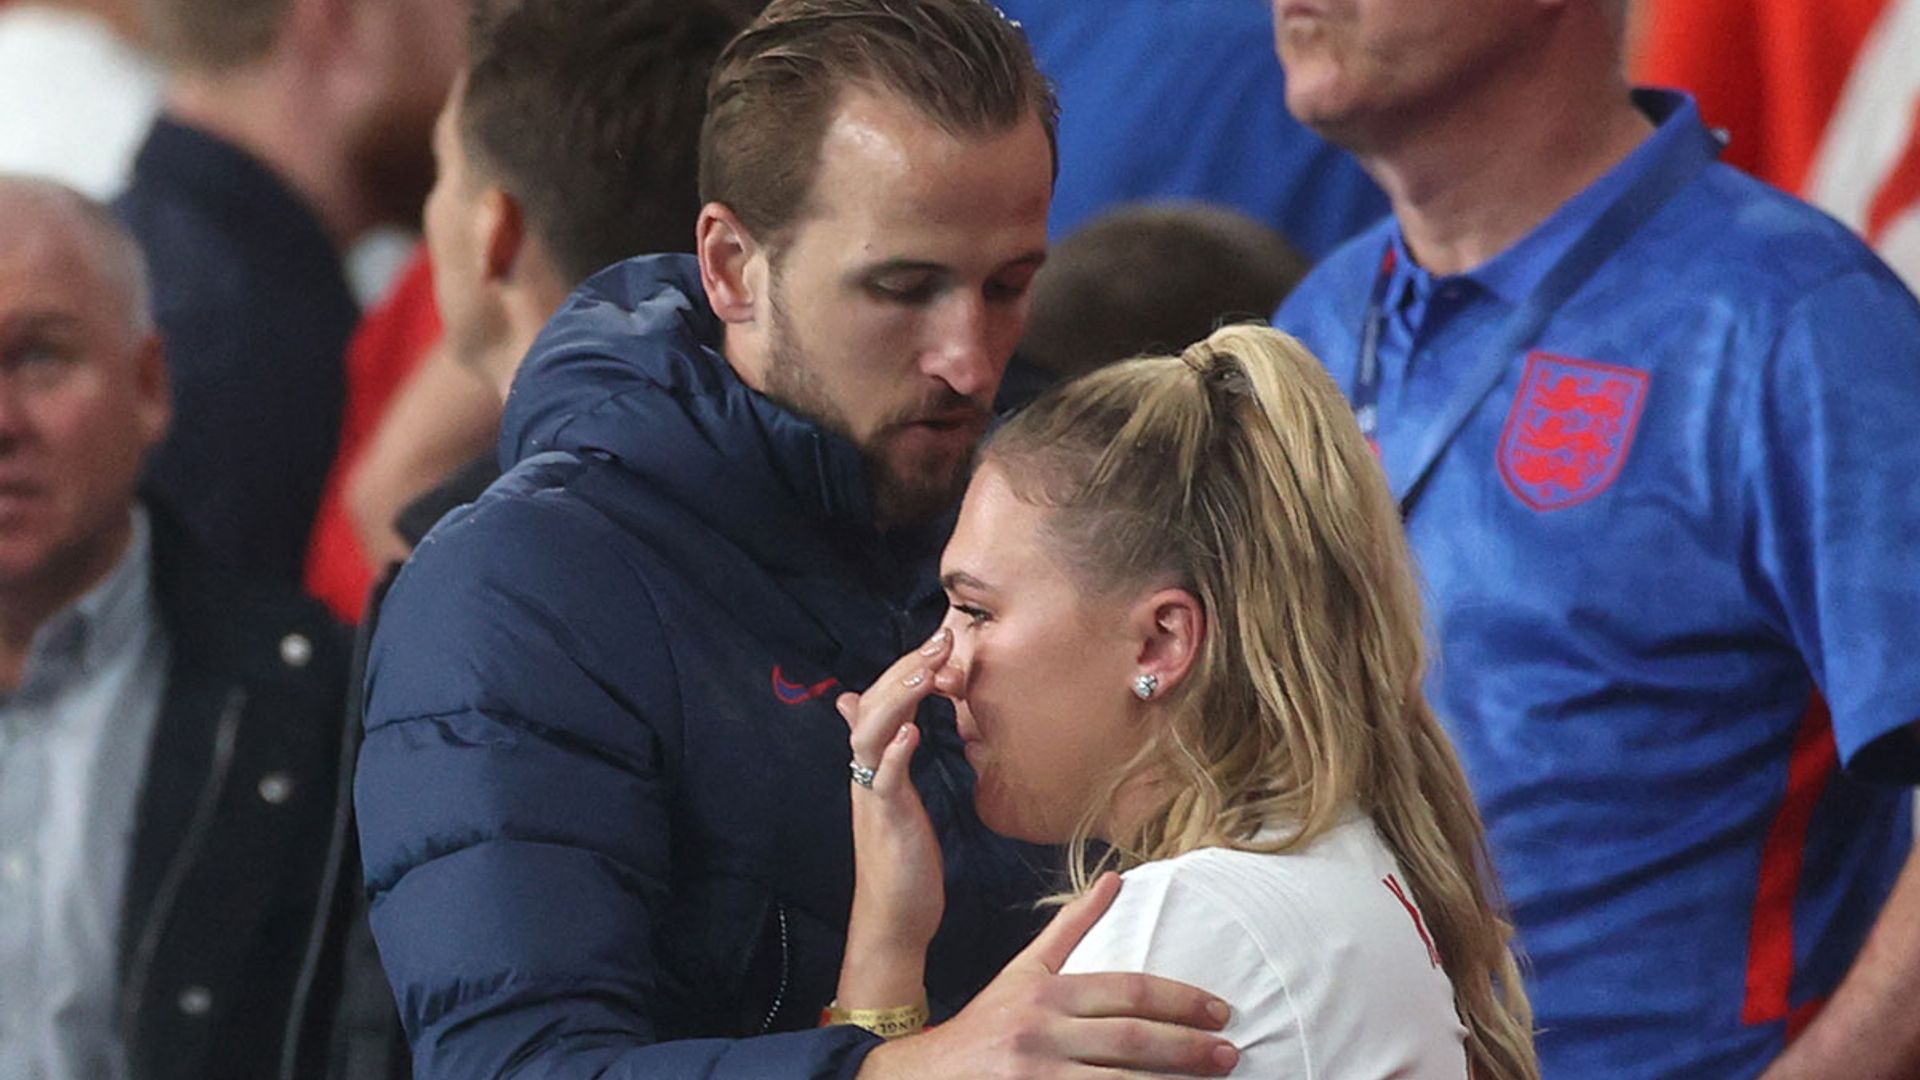 Harry Kane comforts heartbroken wife Katie after she bursts into tears over England's Euro loss